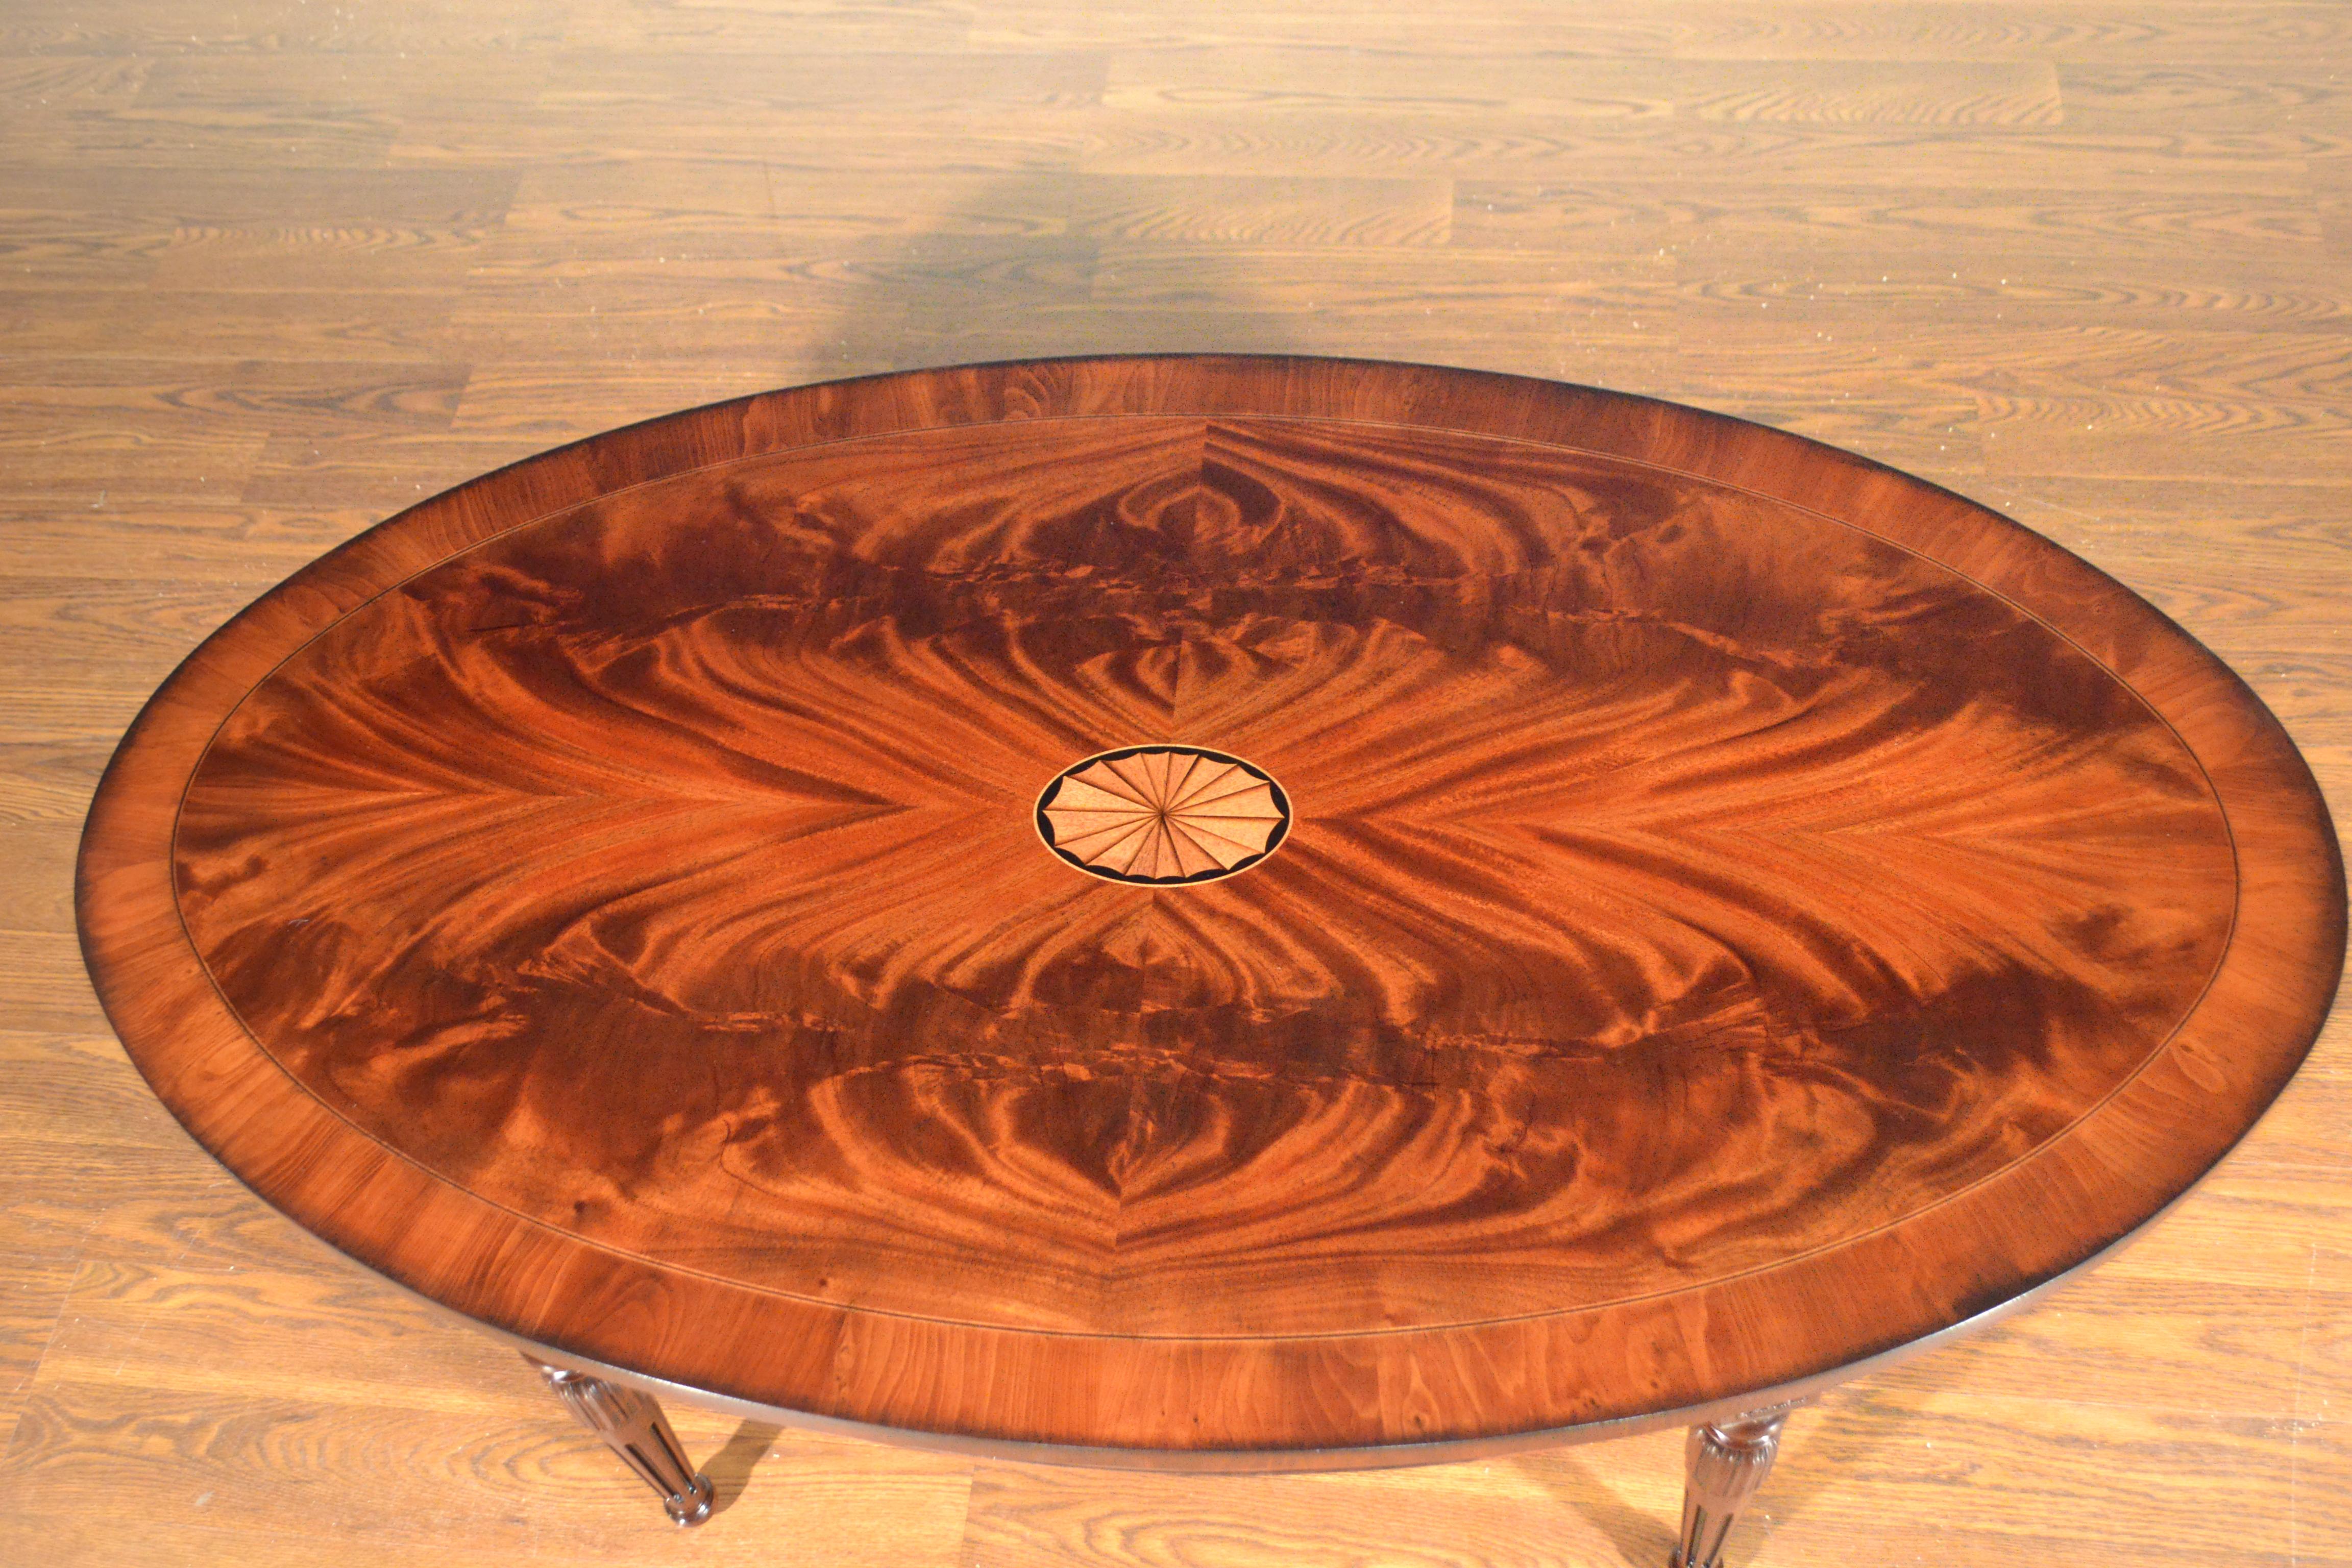 This is a made-to-order traditional oval mahogany coffee table made in the Leighton Hall shop. It features a field of booked and butted crotch mahogany and a border of Yew wood with a center medallion It has a hand rubbed and polished semigloss